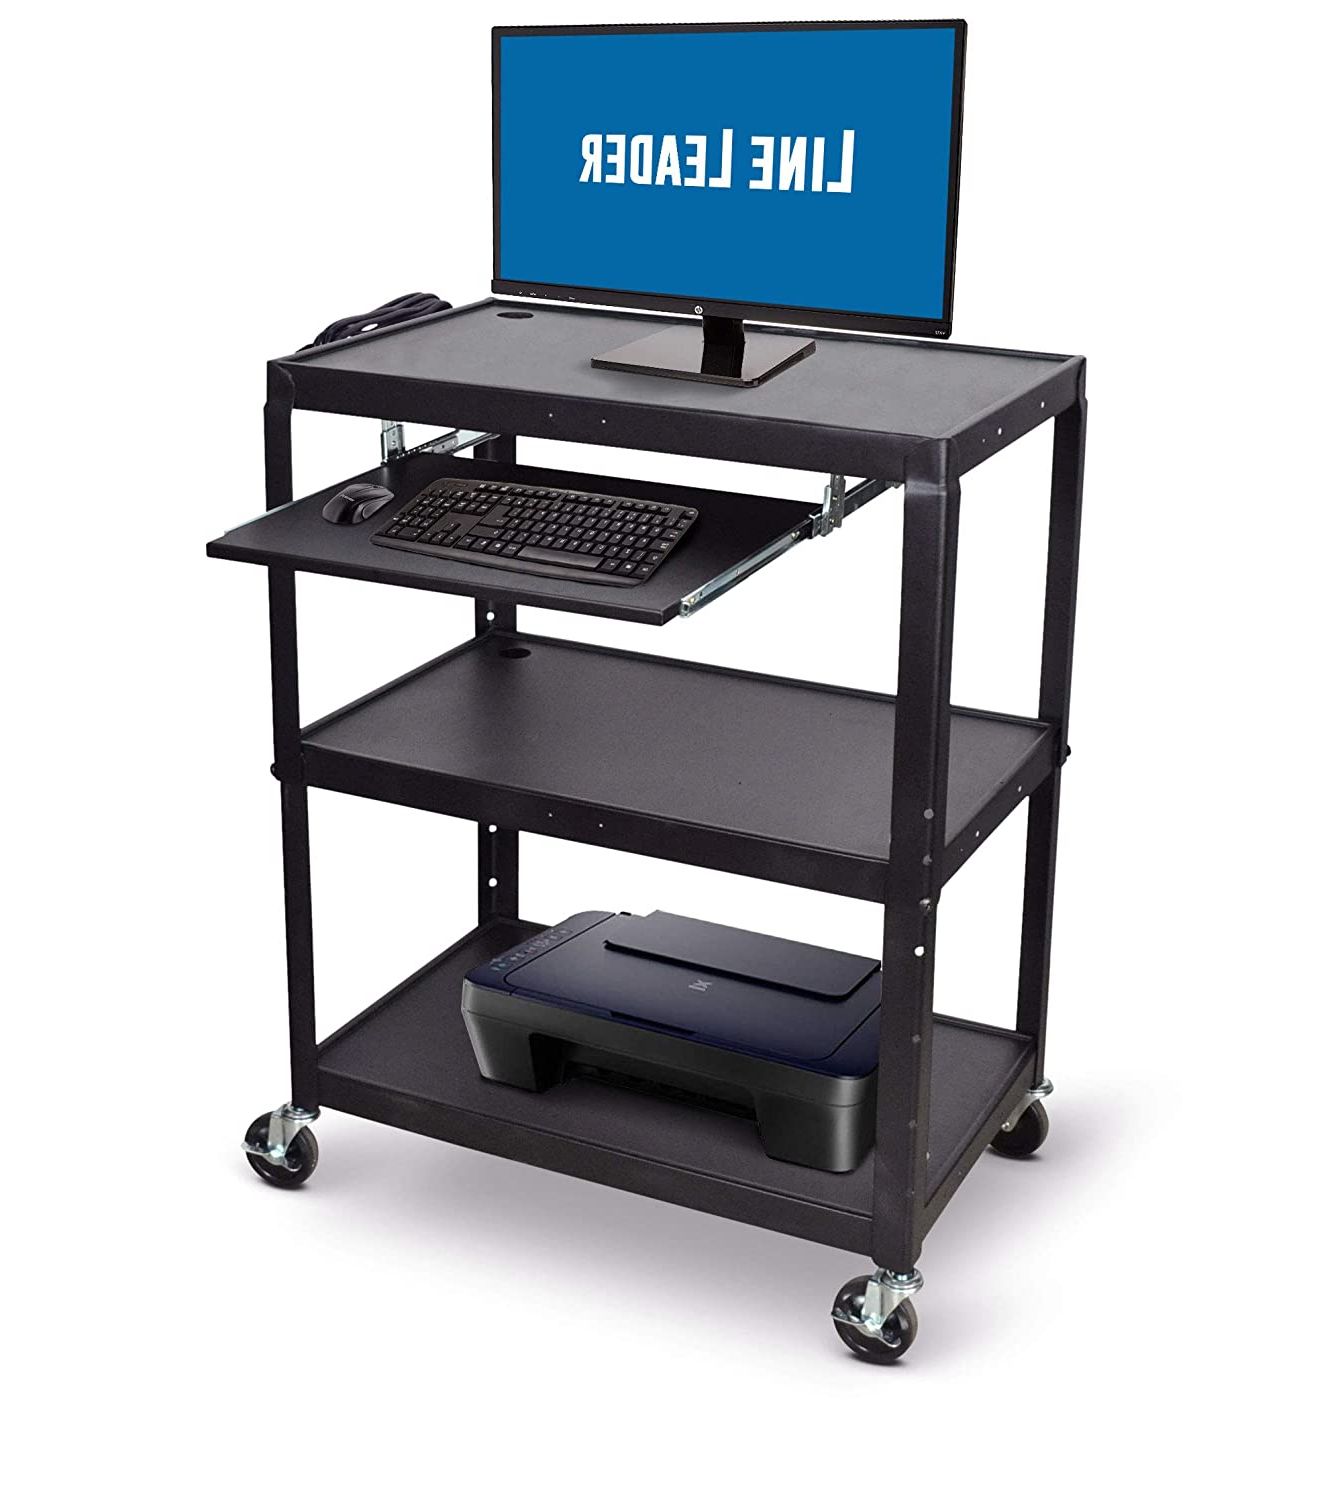 Newest Large Rolling Tv Stands On Wheels With Black Finish Metal Shelf Intended For Av Cart – Black 42x24x18 Includes Three Height Adjustable (View 1 of 10)